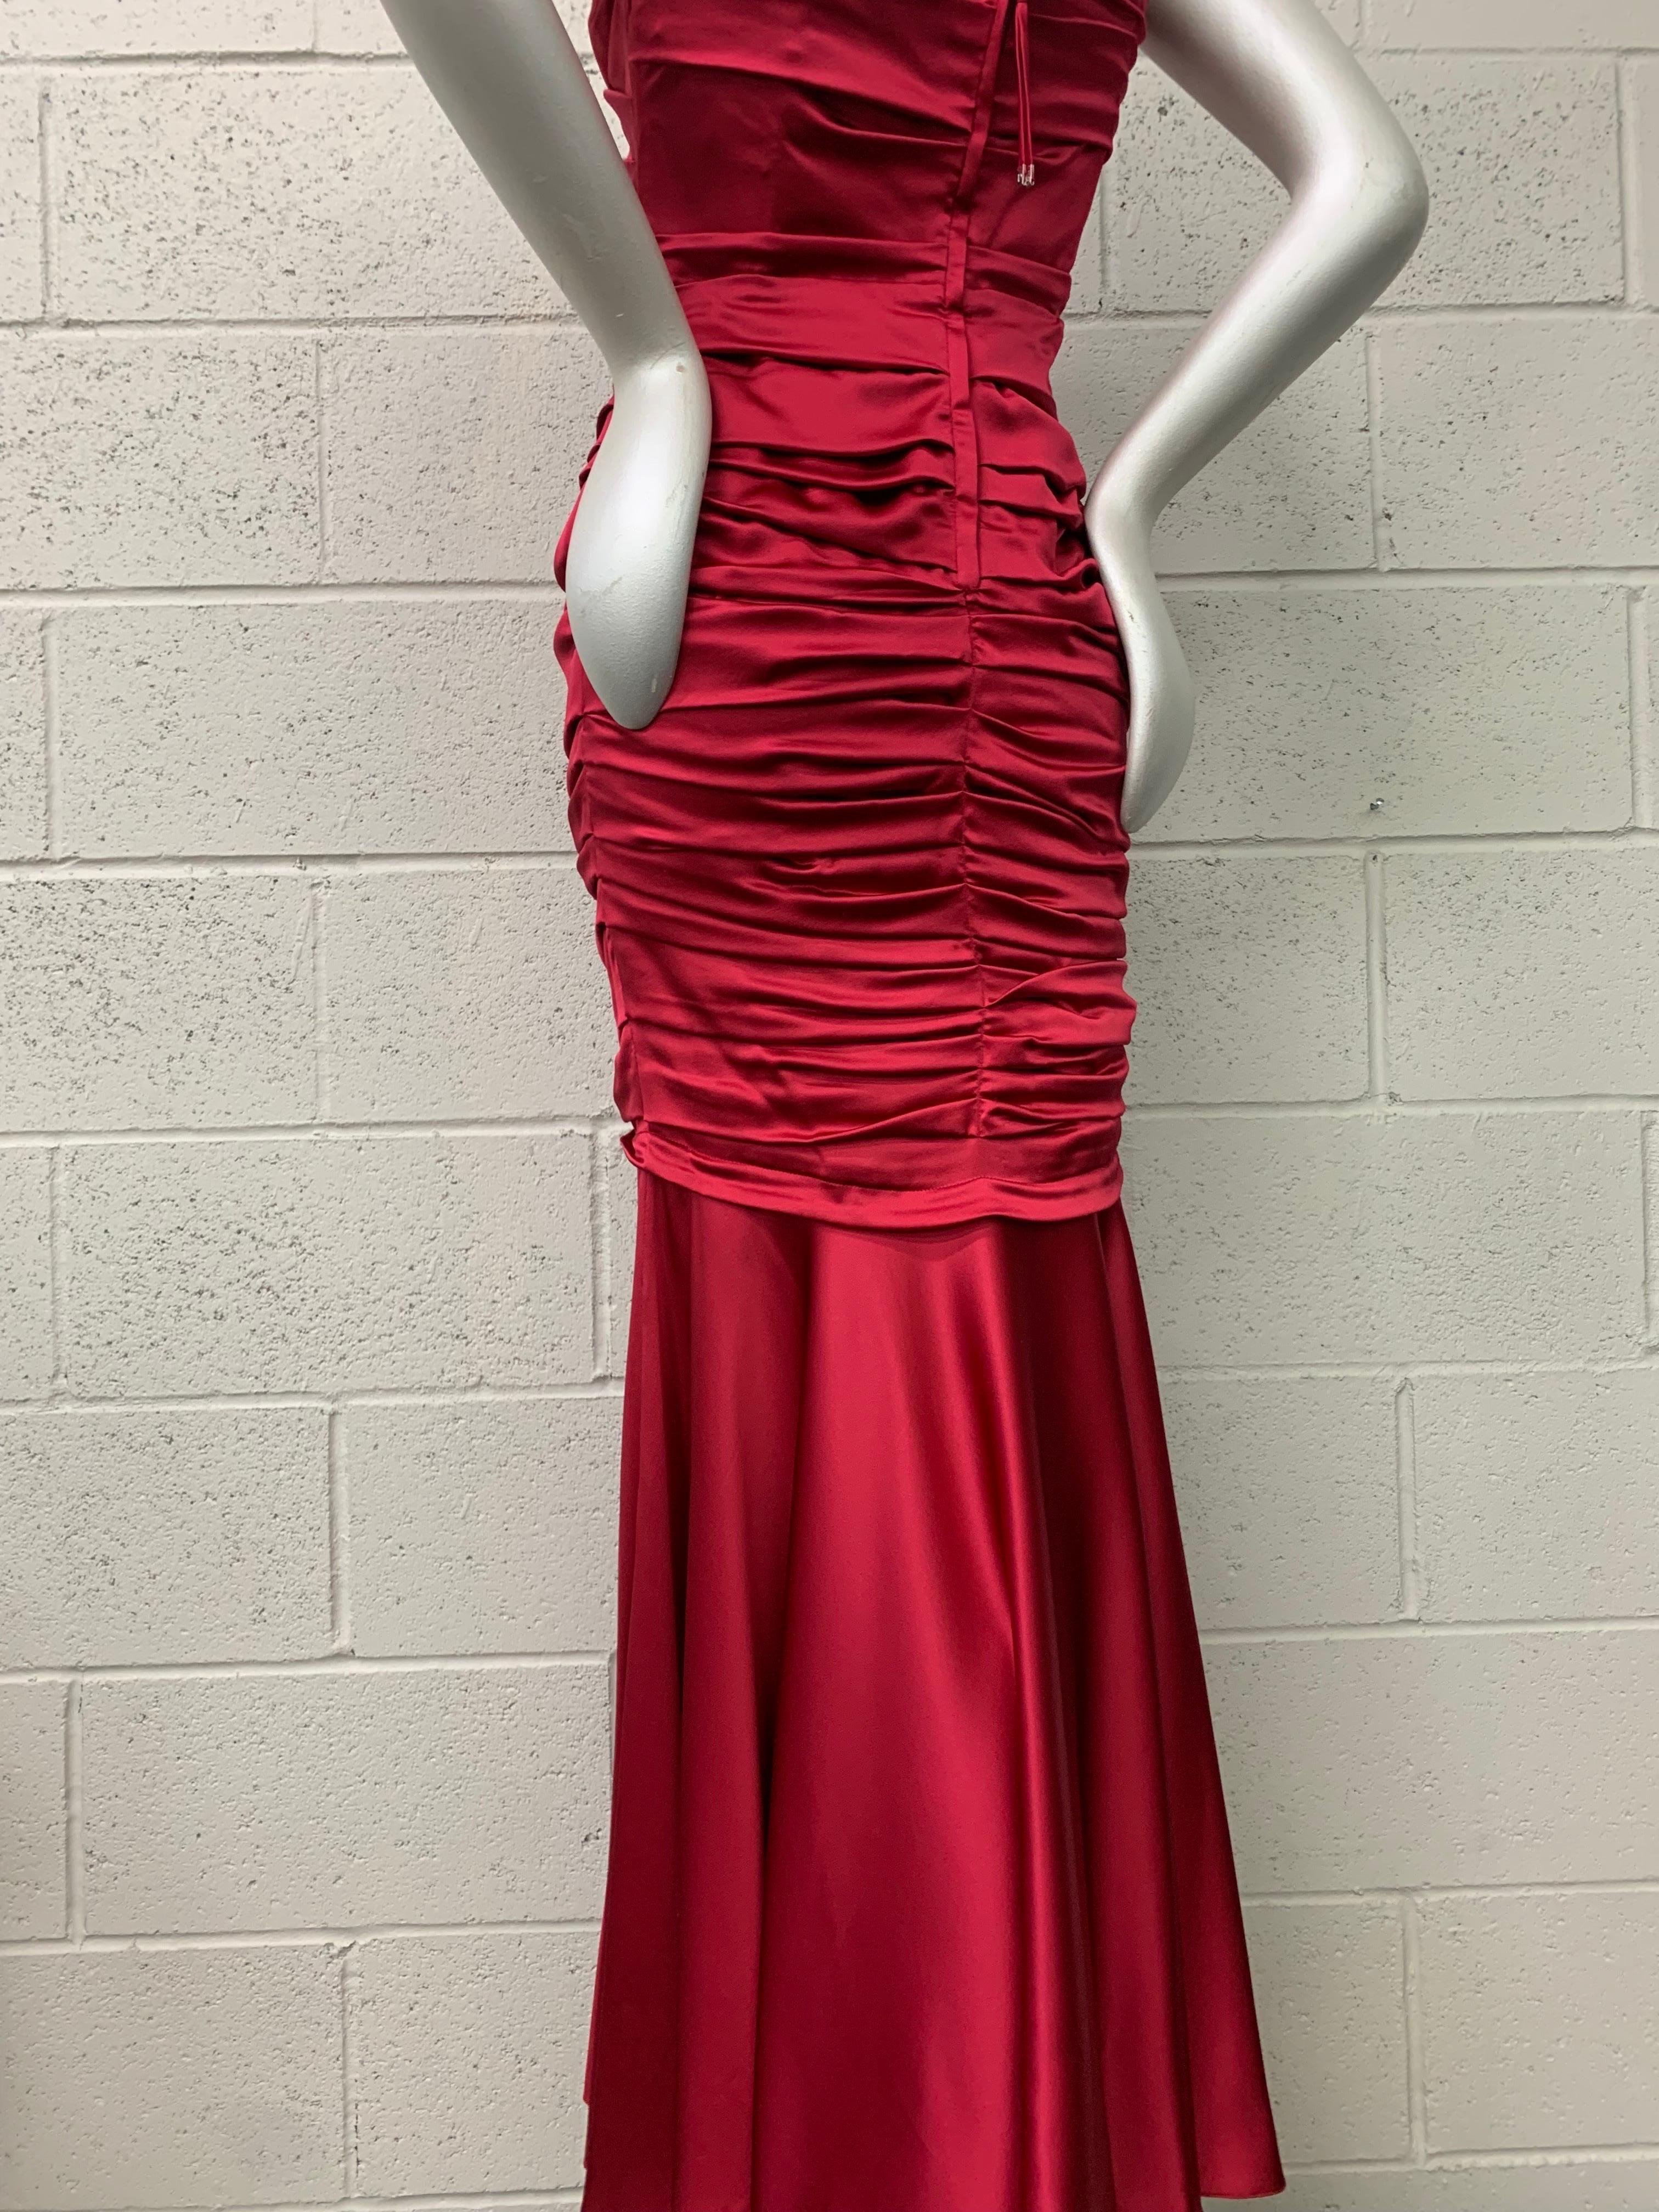 Dolce & Gabbana Red Satin Strapless Corset Gown w Fishtail Hem & Ruched Bodice For Sale 7